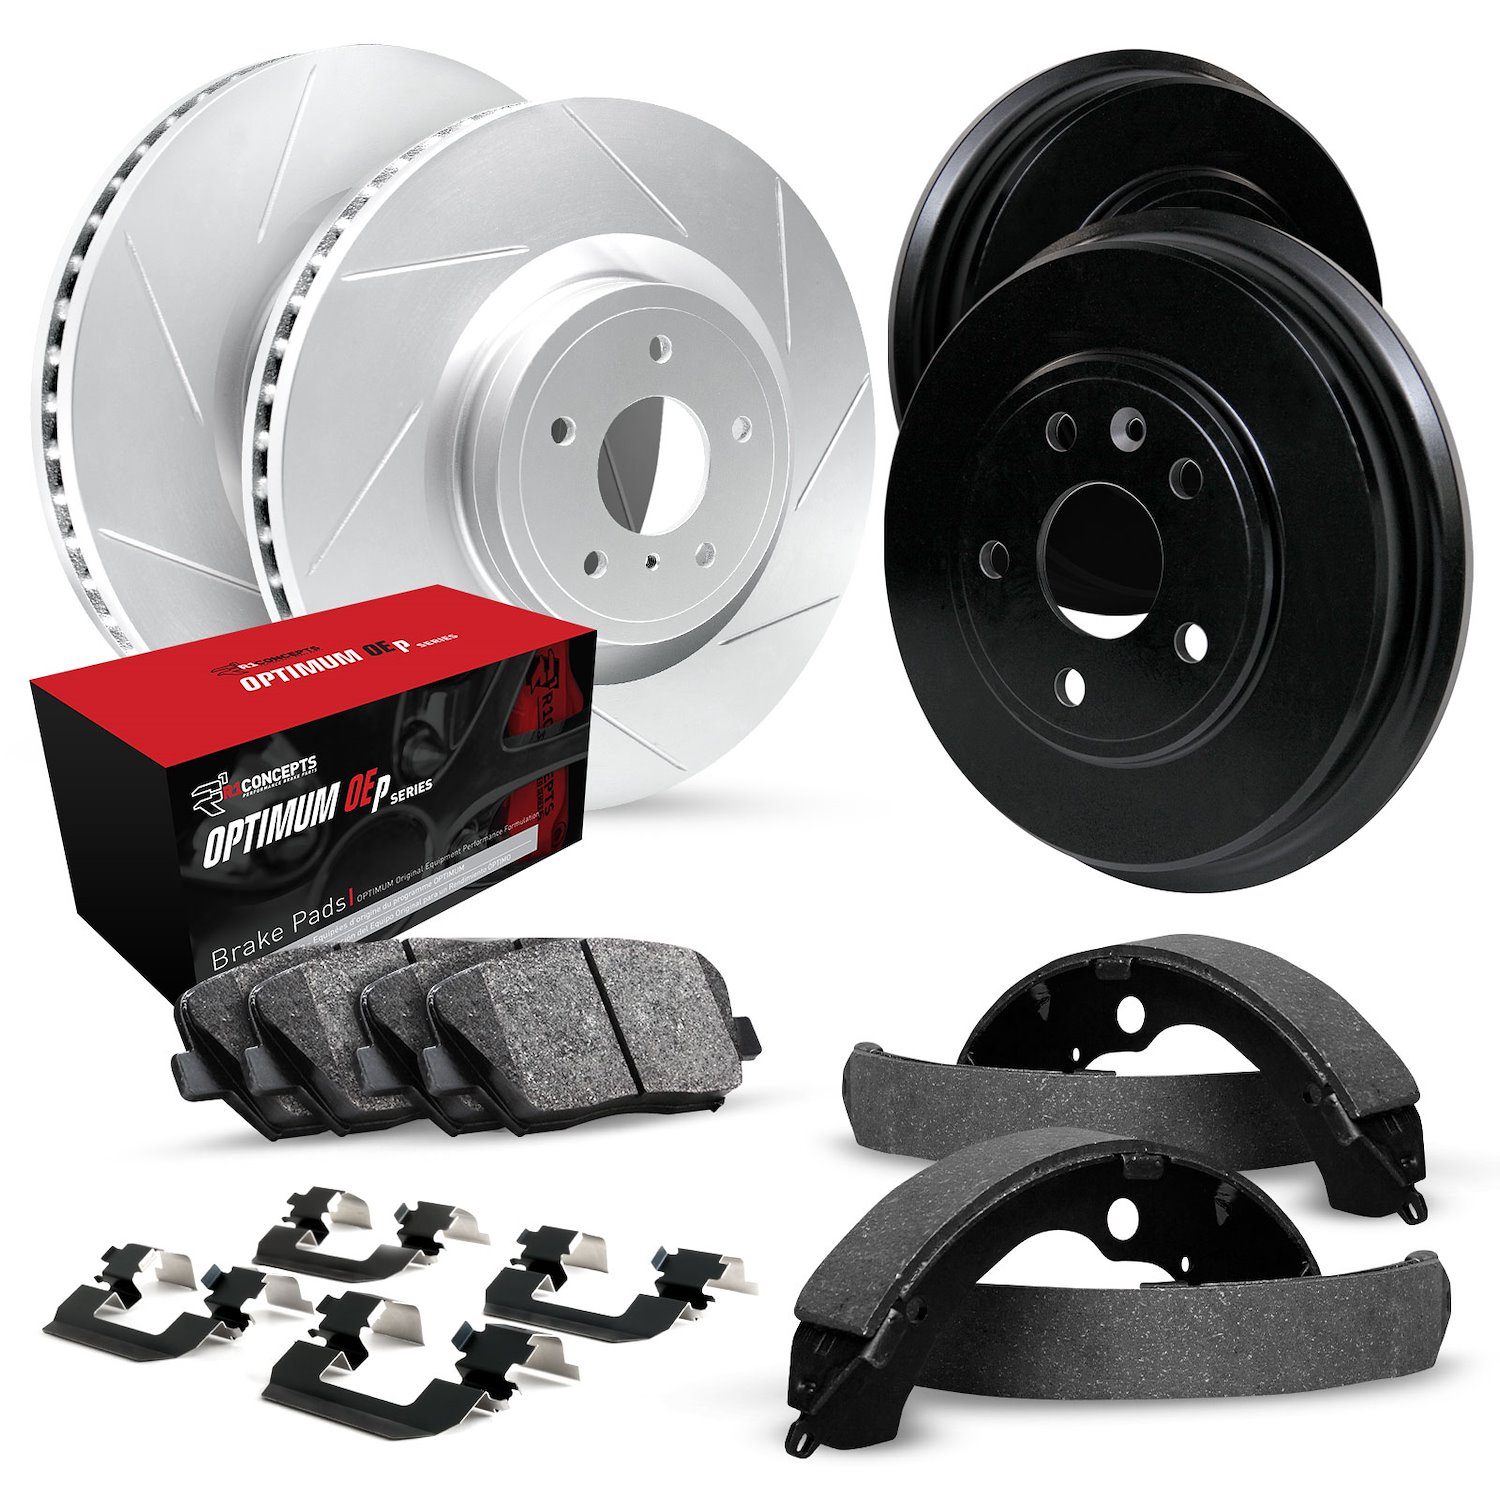 GEO-Carbon Slotted Brake Rotor & Drum Set w/Optimum OE Pads, Shoes, & Hardware, 1987-1991 GM, Position: Front & Rear